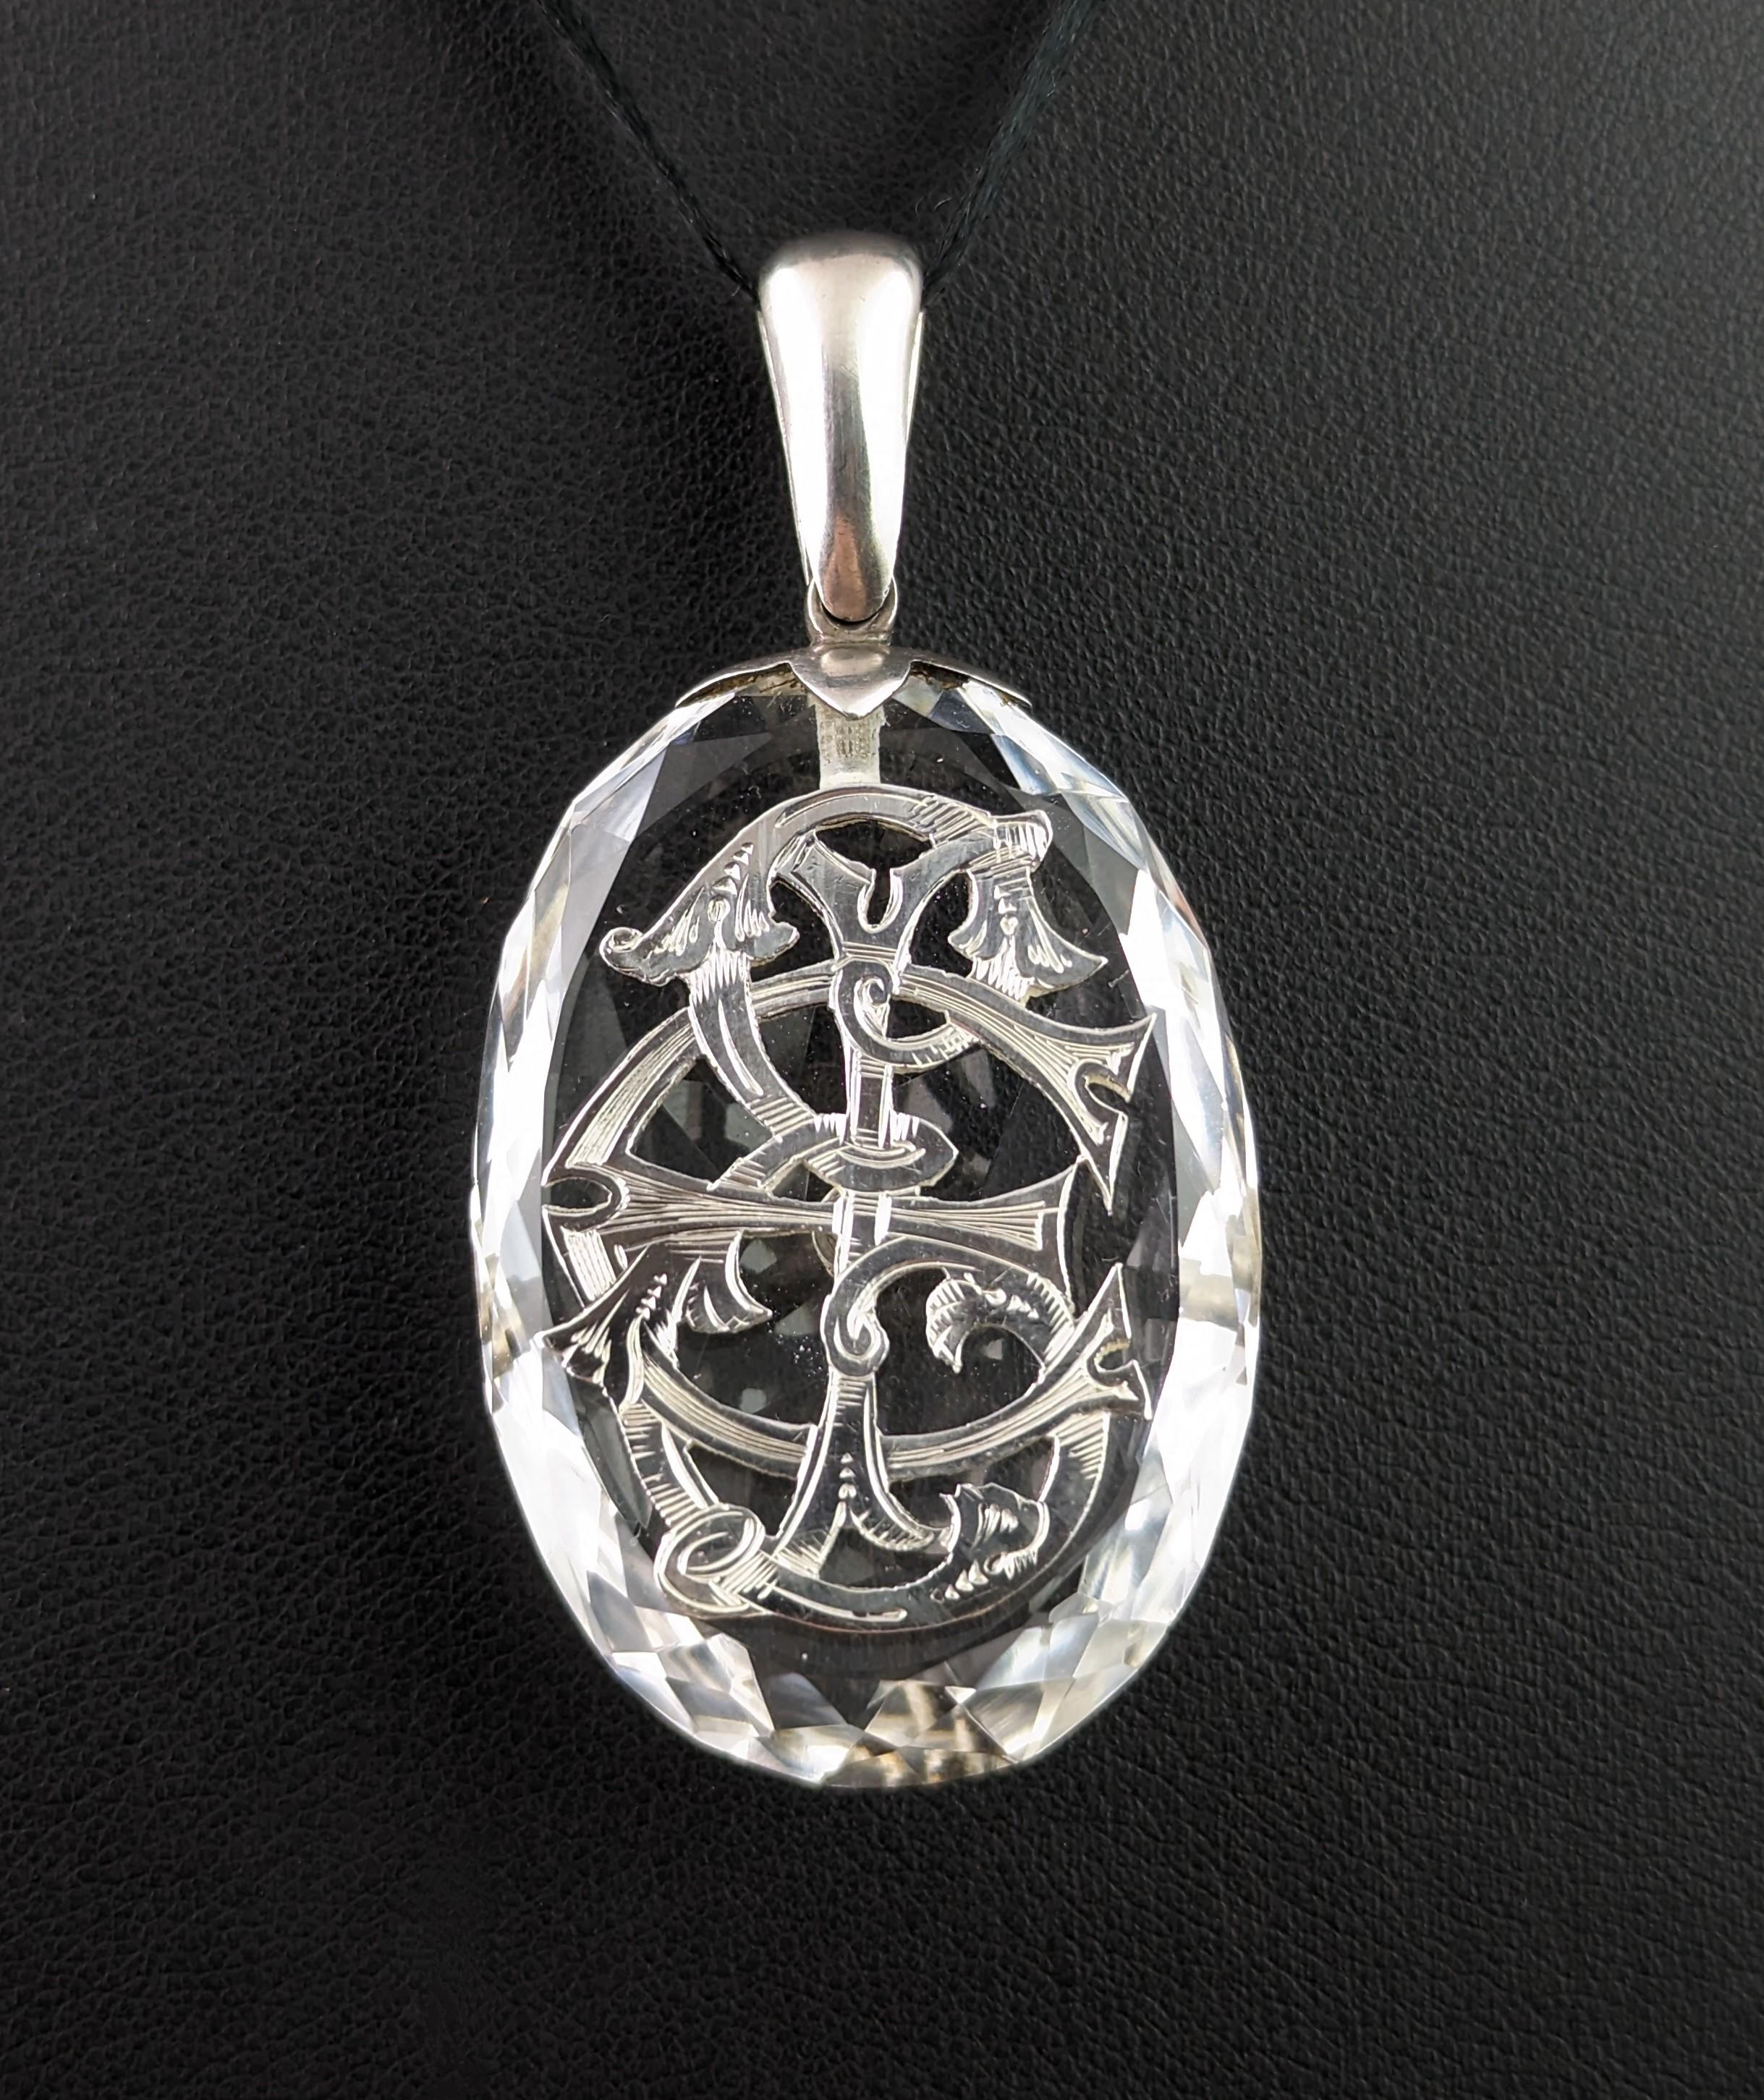 You can't help but be enchanted by this magical antique Rock crystal monogram pendant.

One of the most grand rock crystal pieces with the amazing and wonderfully faceted large oval shaped rock crystal embellished with a large sterling silver